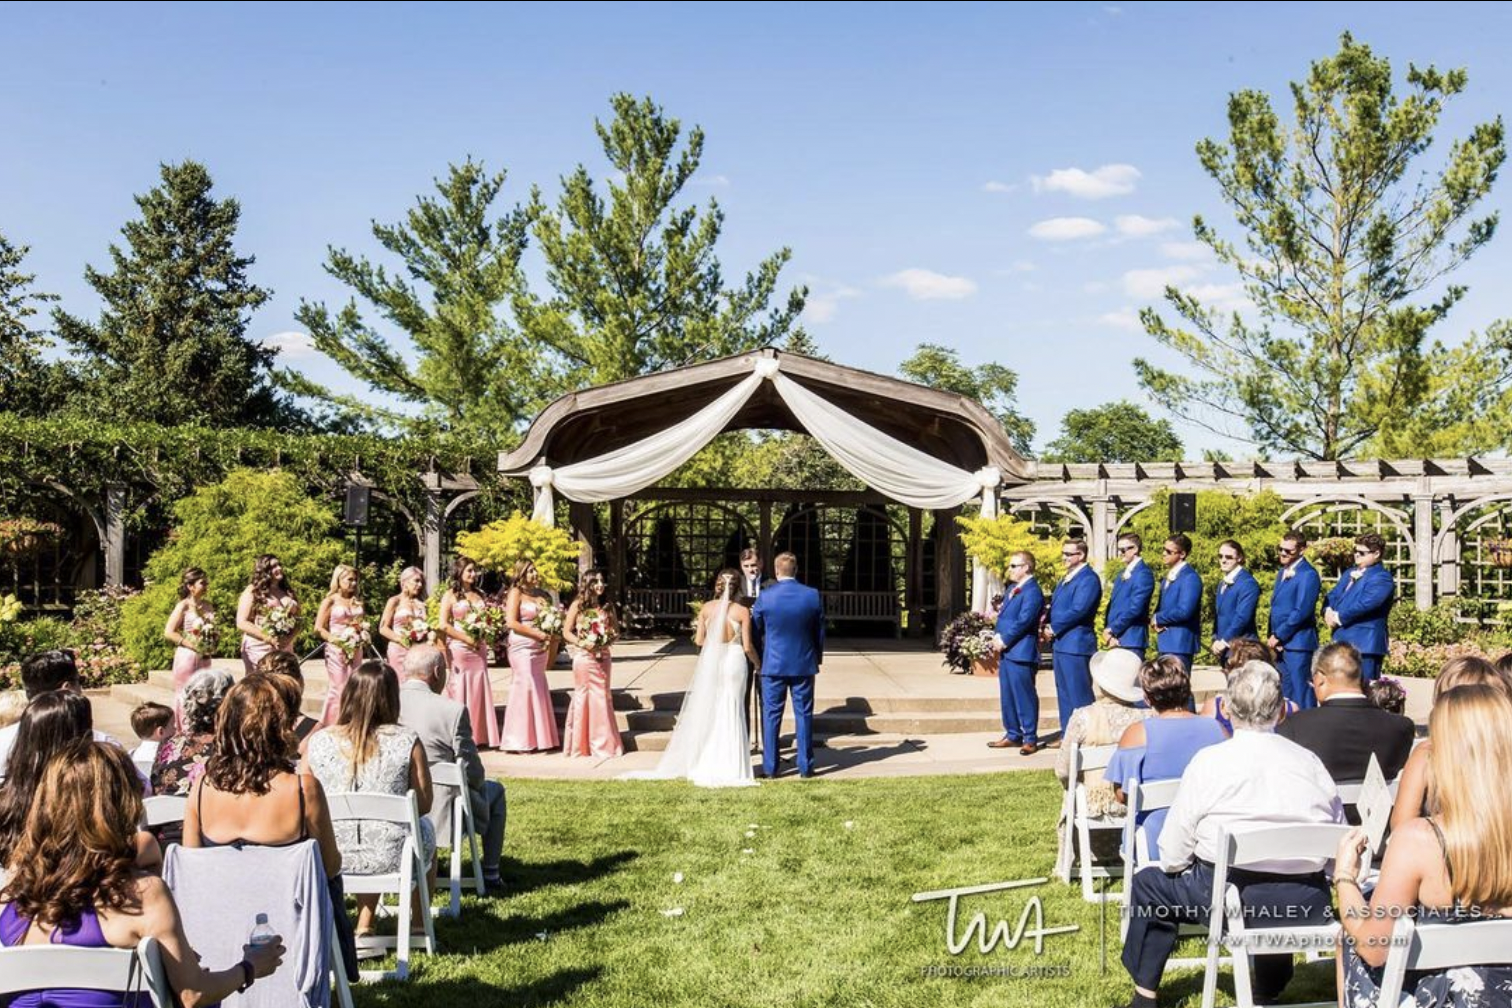 Bride and groom take their vows at outdoor wedding